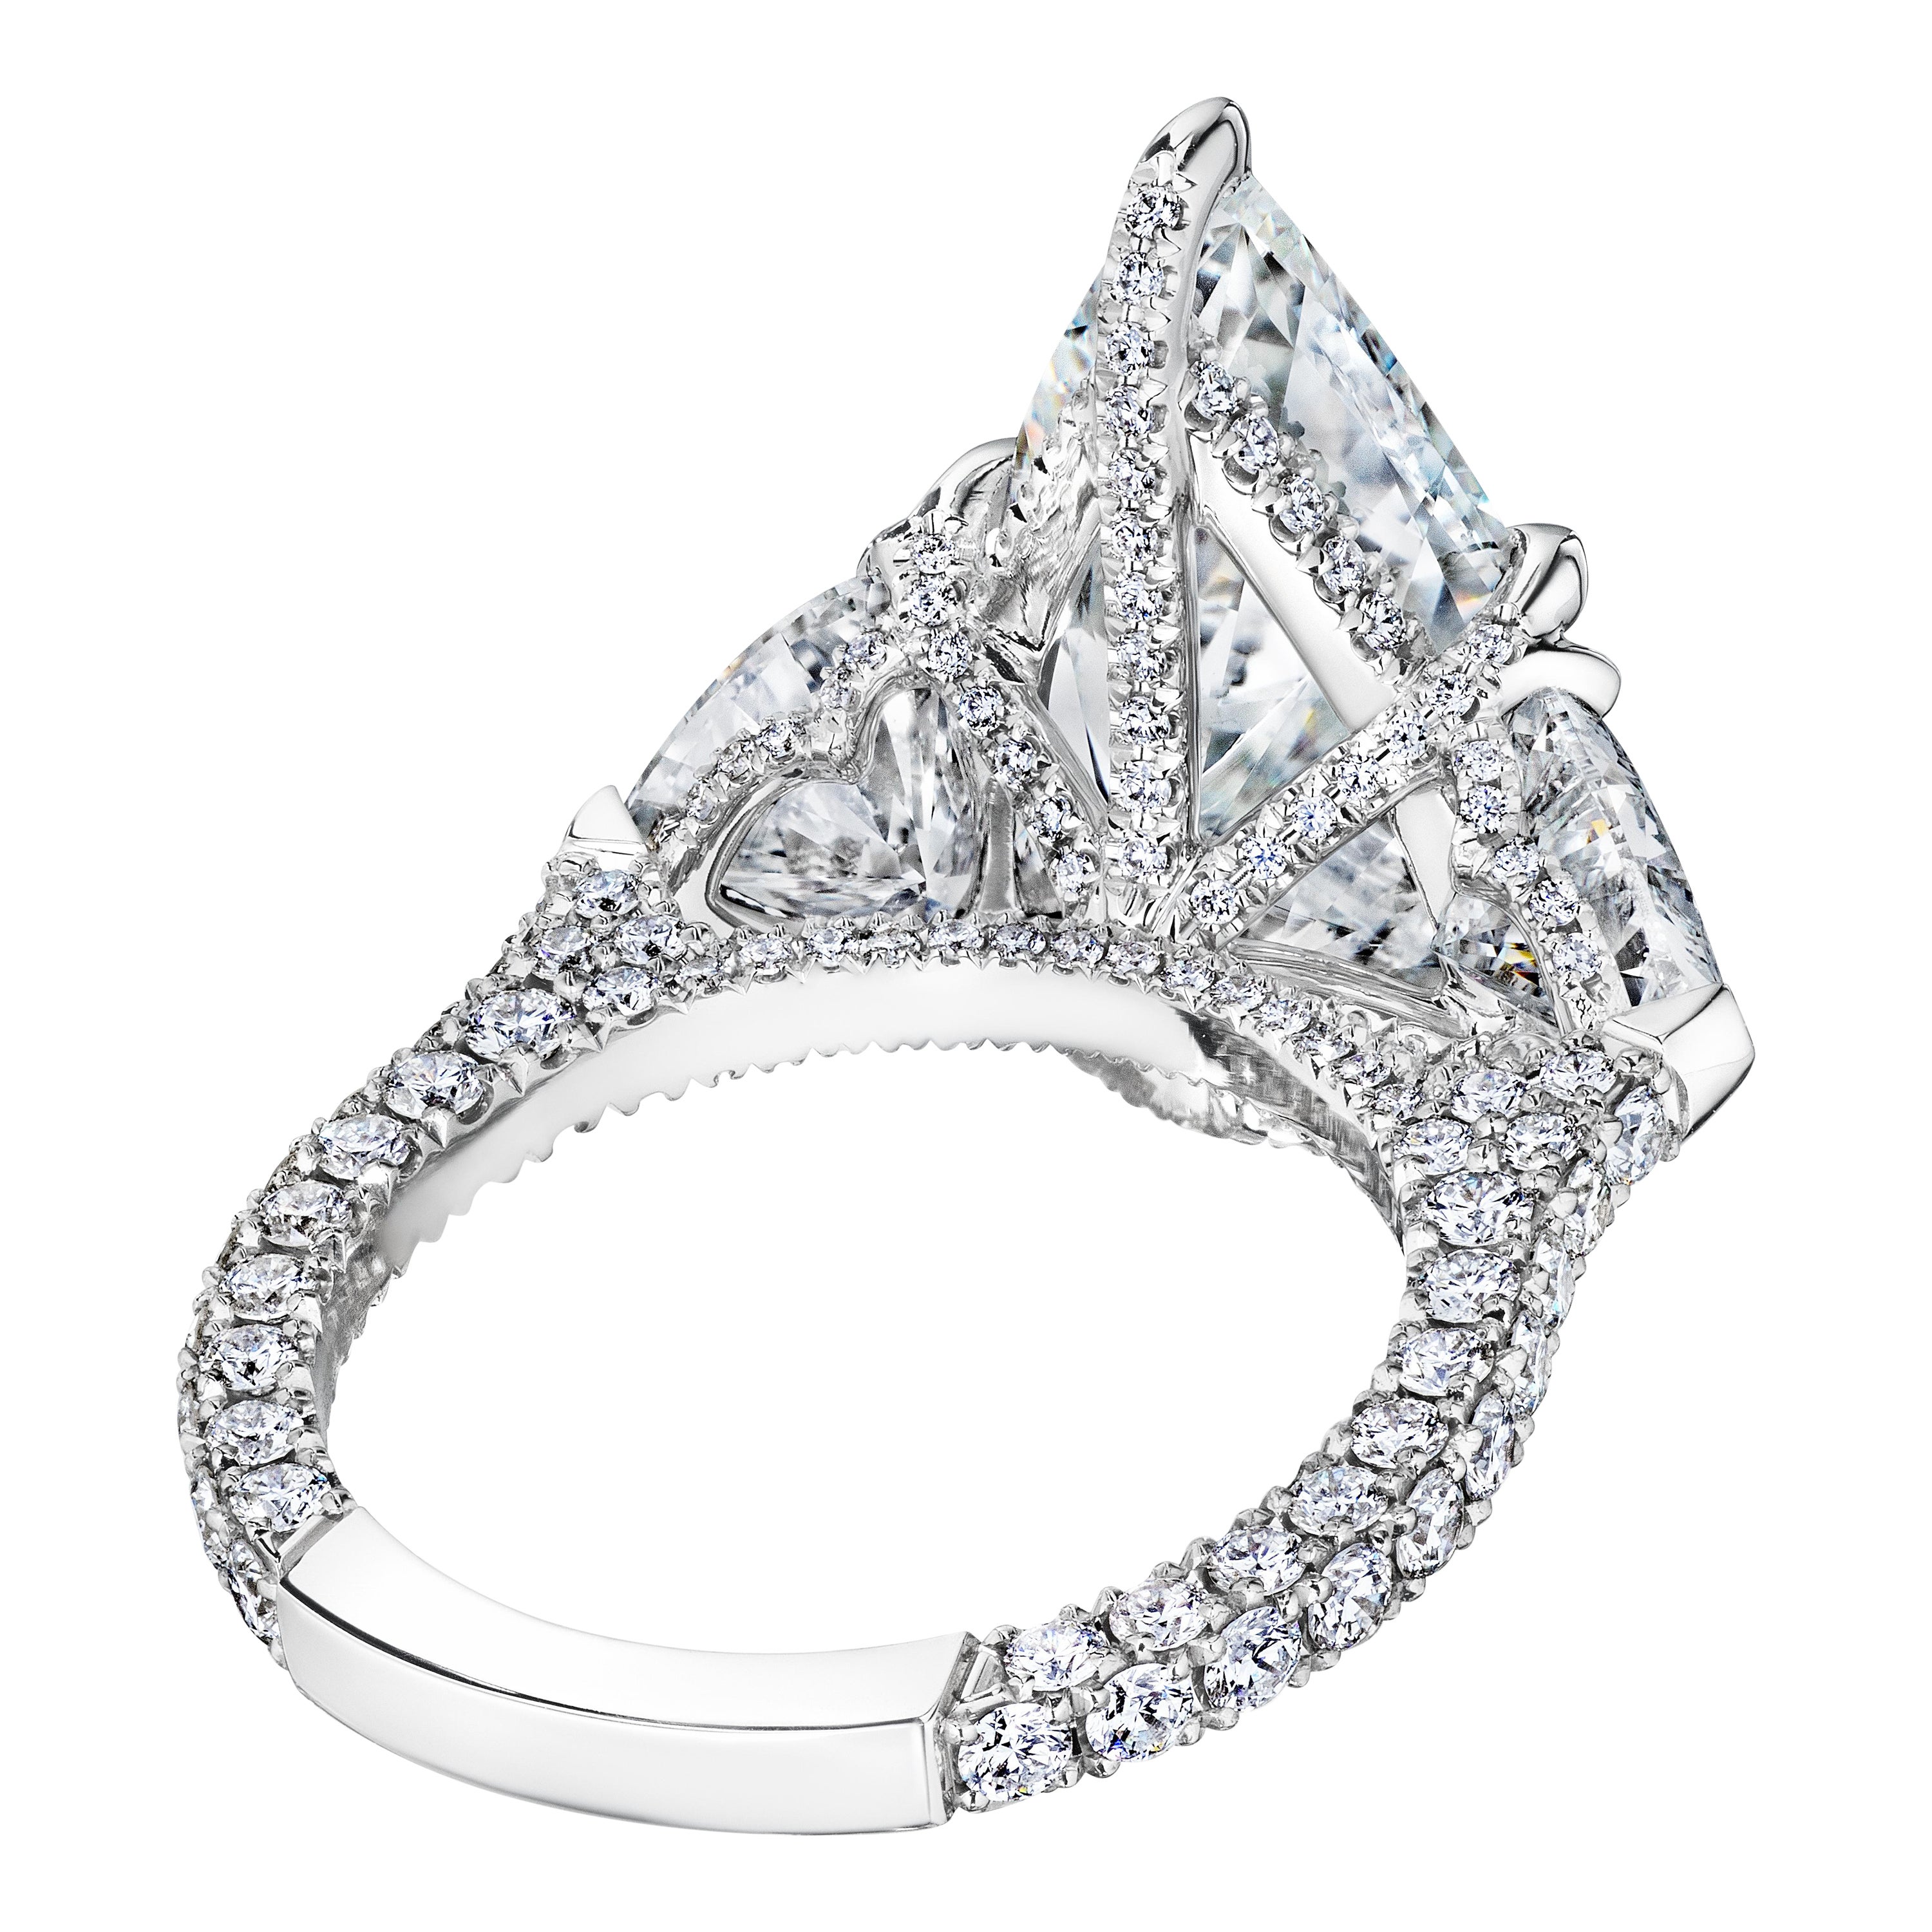 For Sale:  Kristen 5.60 Carat GIA Certified Pear Shape E in Color and VS1 in Clarity